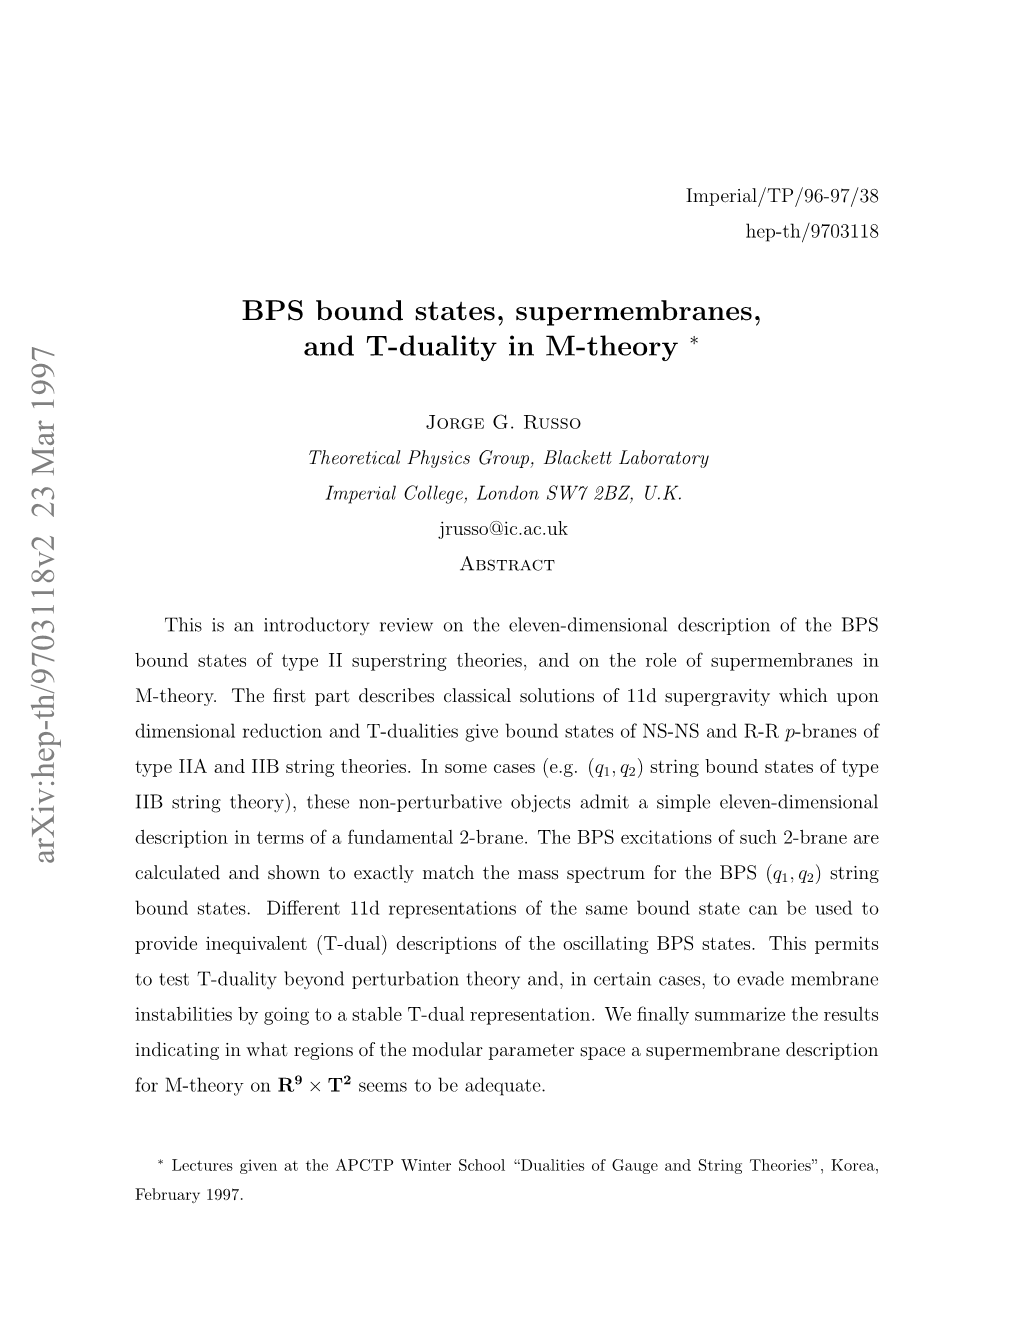 BPS Bound States, Supermembranes, and T-Duality in M-Theory